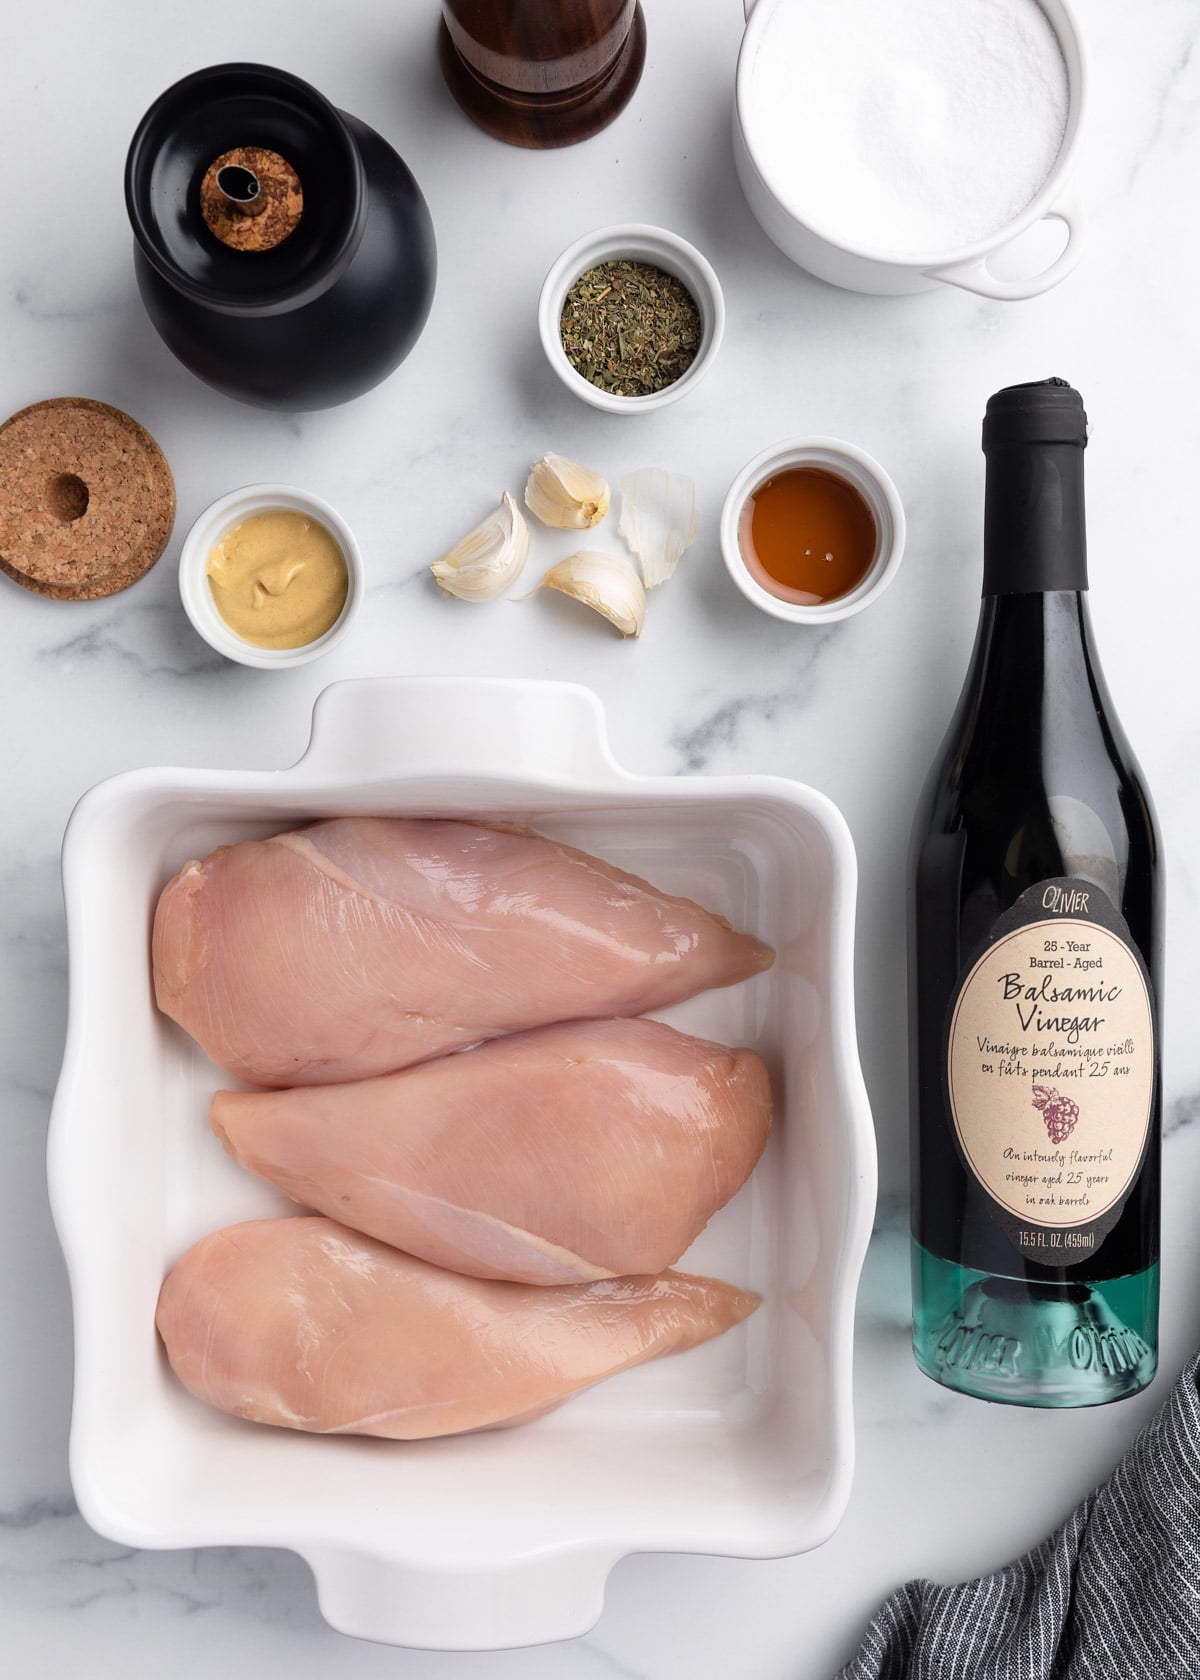 overhead photo of boneless skinless chicken breasts in a white baking dish, surrounded by a bottle of balsamic vinegar and marinade ingredients in small bowls